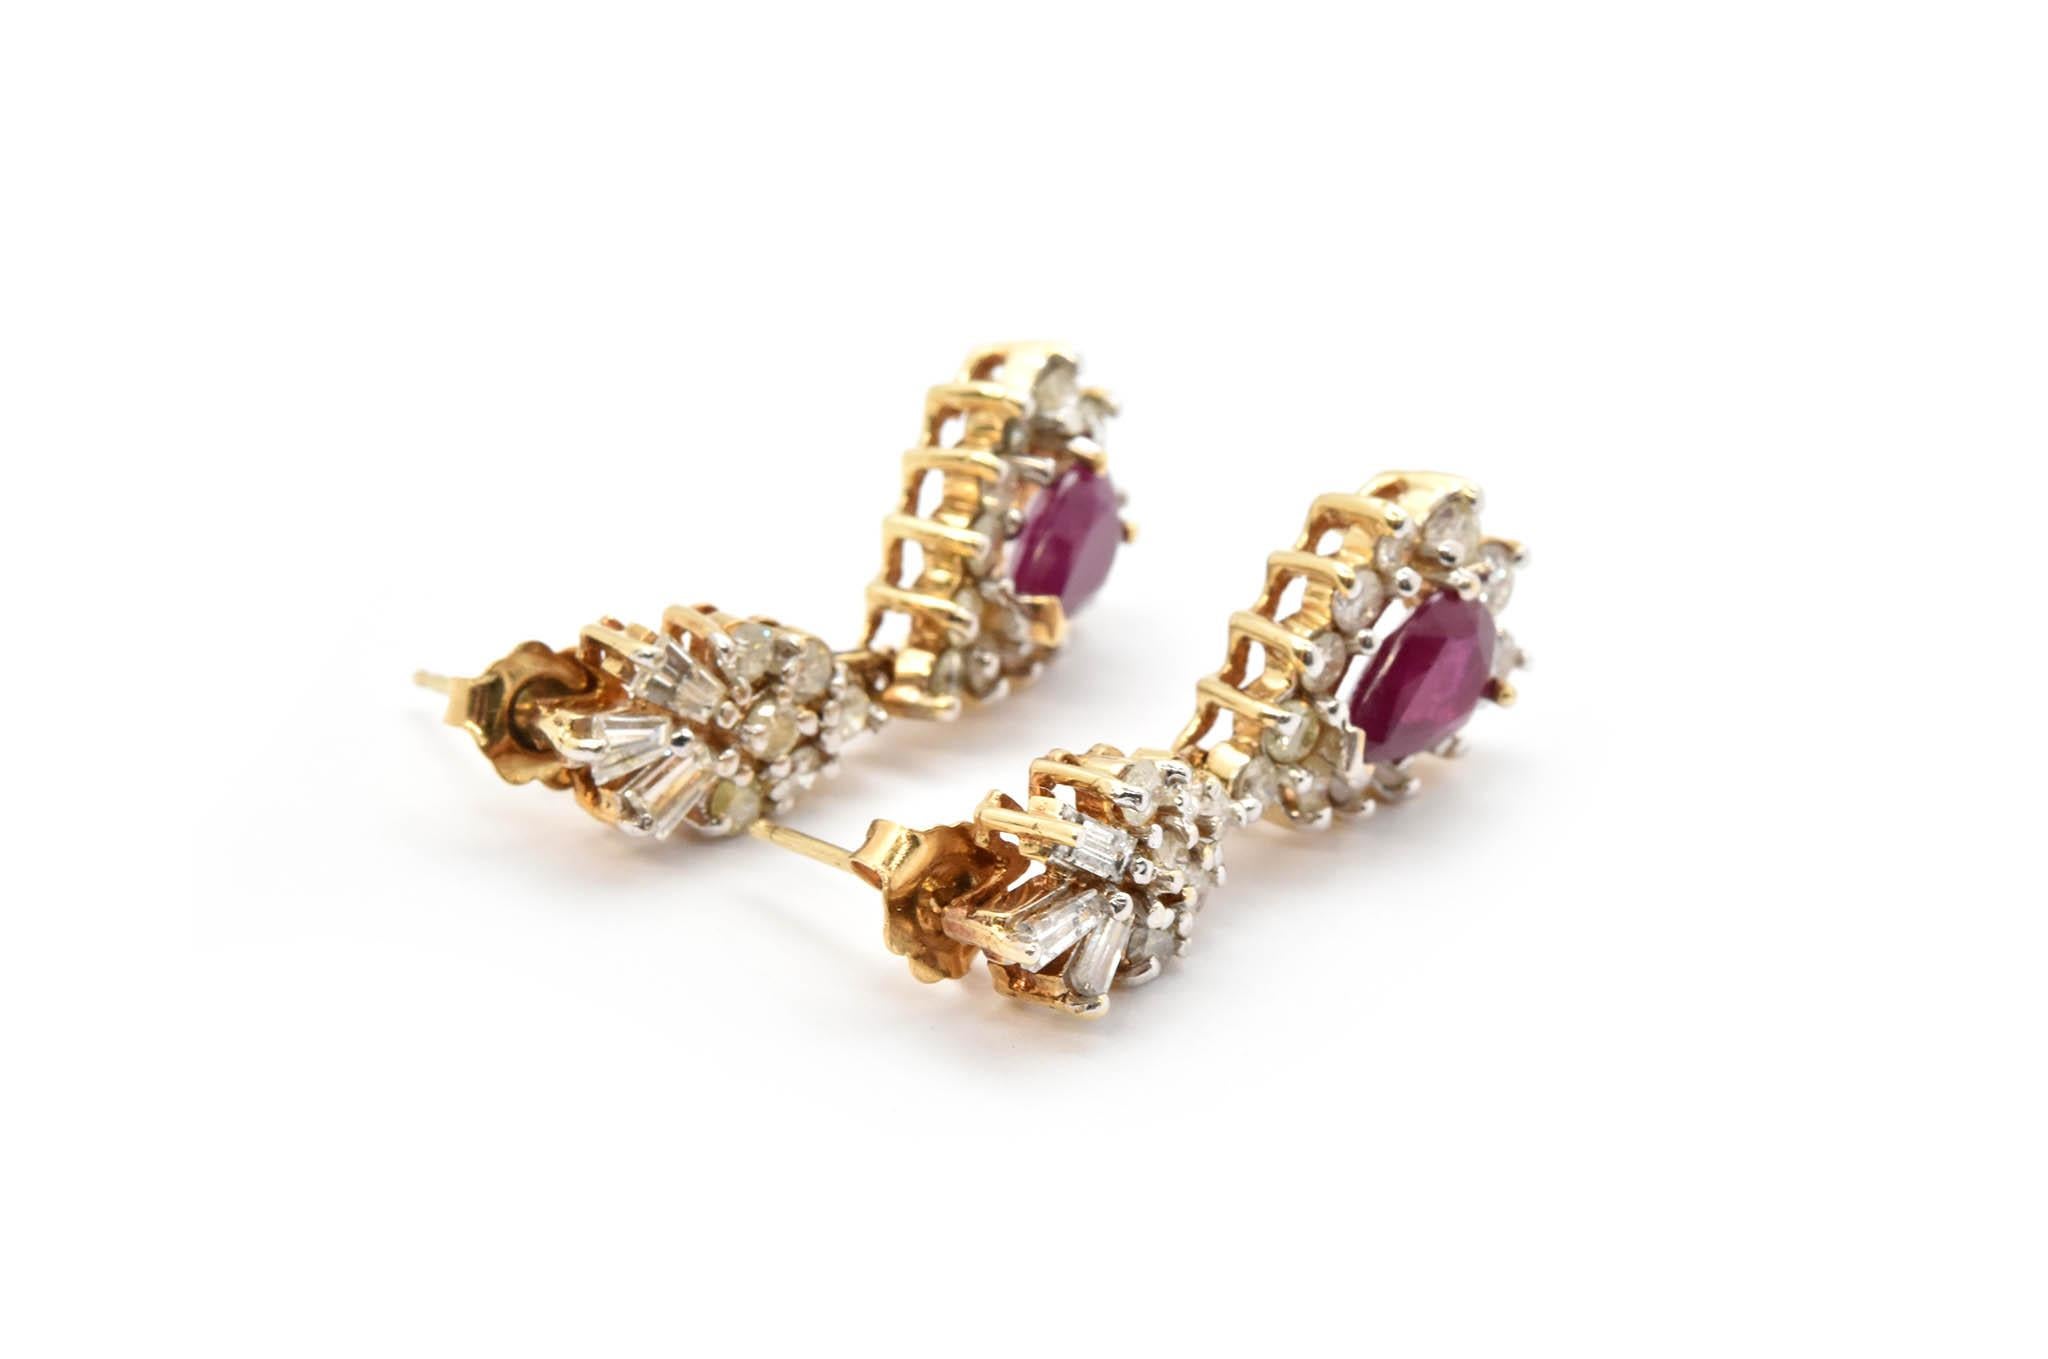 These drop earrings are crafted in 14k yellow gold. Each earring holds a pear cut ruby weighing 1.25cts, for a total weight of 2.50cts. In addition, each earring holds round cut and baguette diamonds. The round brilliant cut diamonds have a total